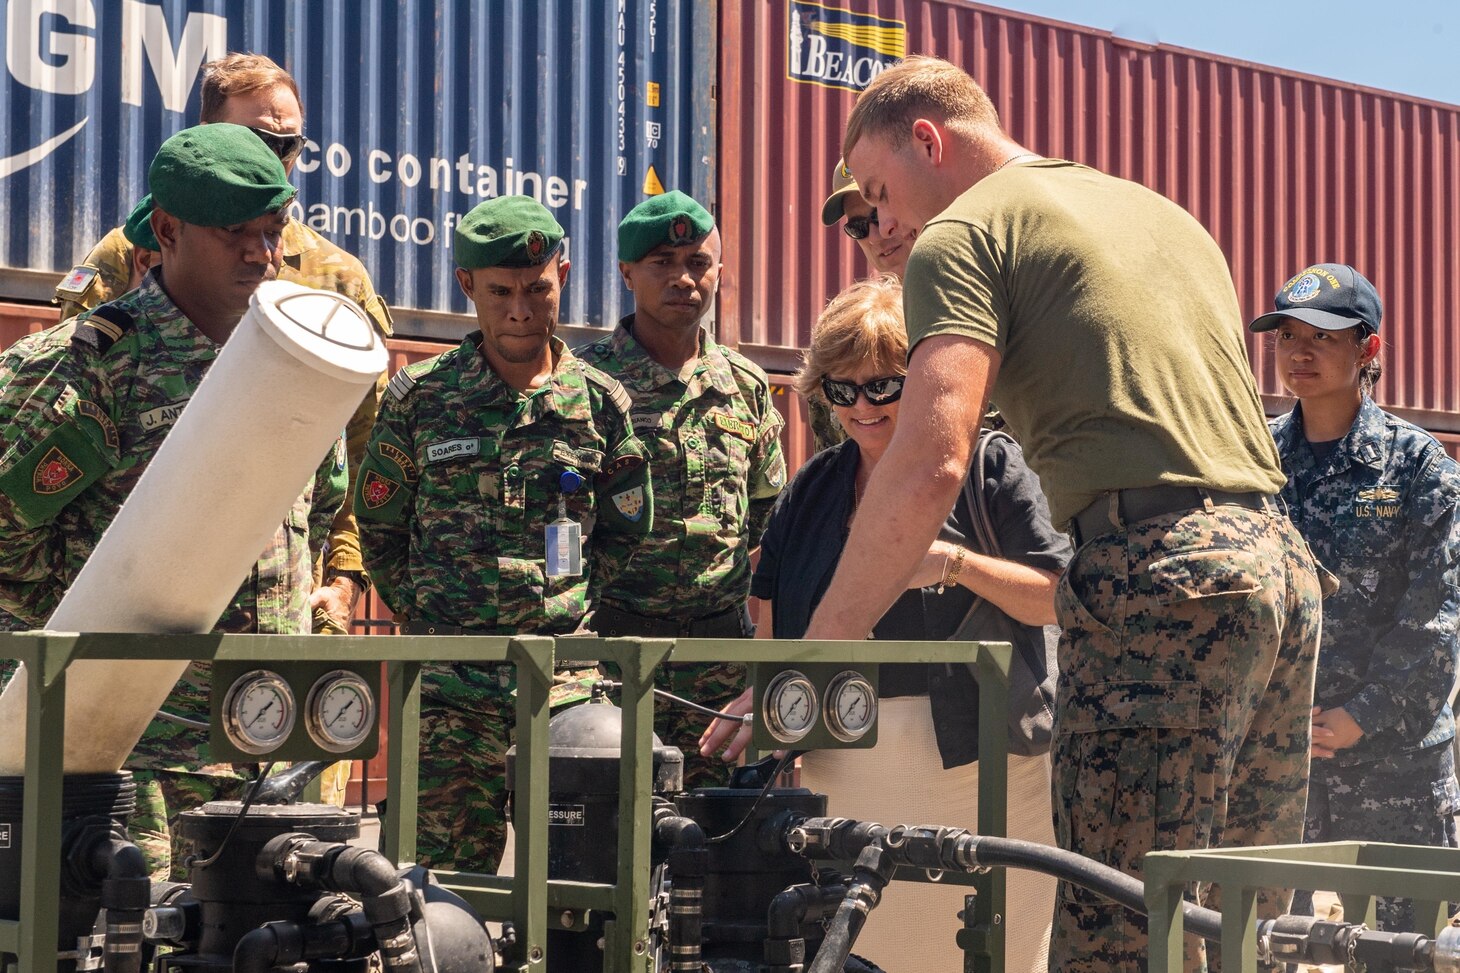 DILI, Timor-Leste (April 23, 2019) – U.S. Marine Corps L.Cpl. Taylor Carr explains the components of a lightweight water purification system to Kathleen Fitzpatrick, U.S. ambassador to Timor-Leste, and Timor-Leste Defense Force members during a subject matter expert exchange as part of Pacific Partnership 2019. Pacific Partnership, now in its 14th iteration, is the largest annual multinational humanitarian assistance and disaster relief preparedness mission conducted in the Indo-Pacific. Each year the mission team works collectively with host and partner nations to enhance regional interoperability and disaster response capabilities, increase security and stability in the region, and foster new and enduring friendships in the Indo-Pacific.